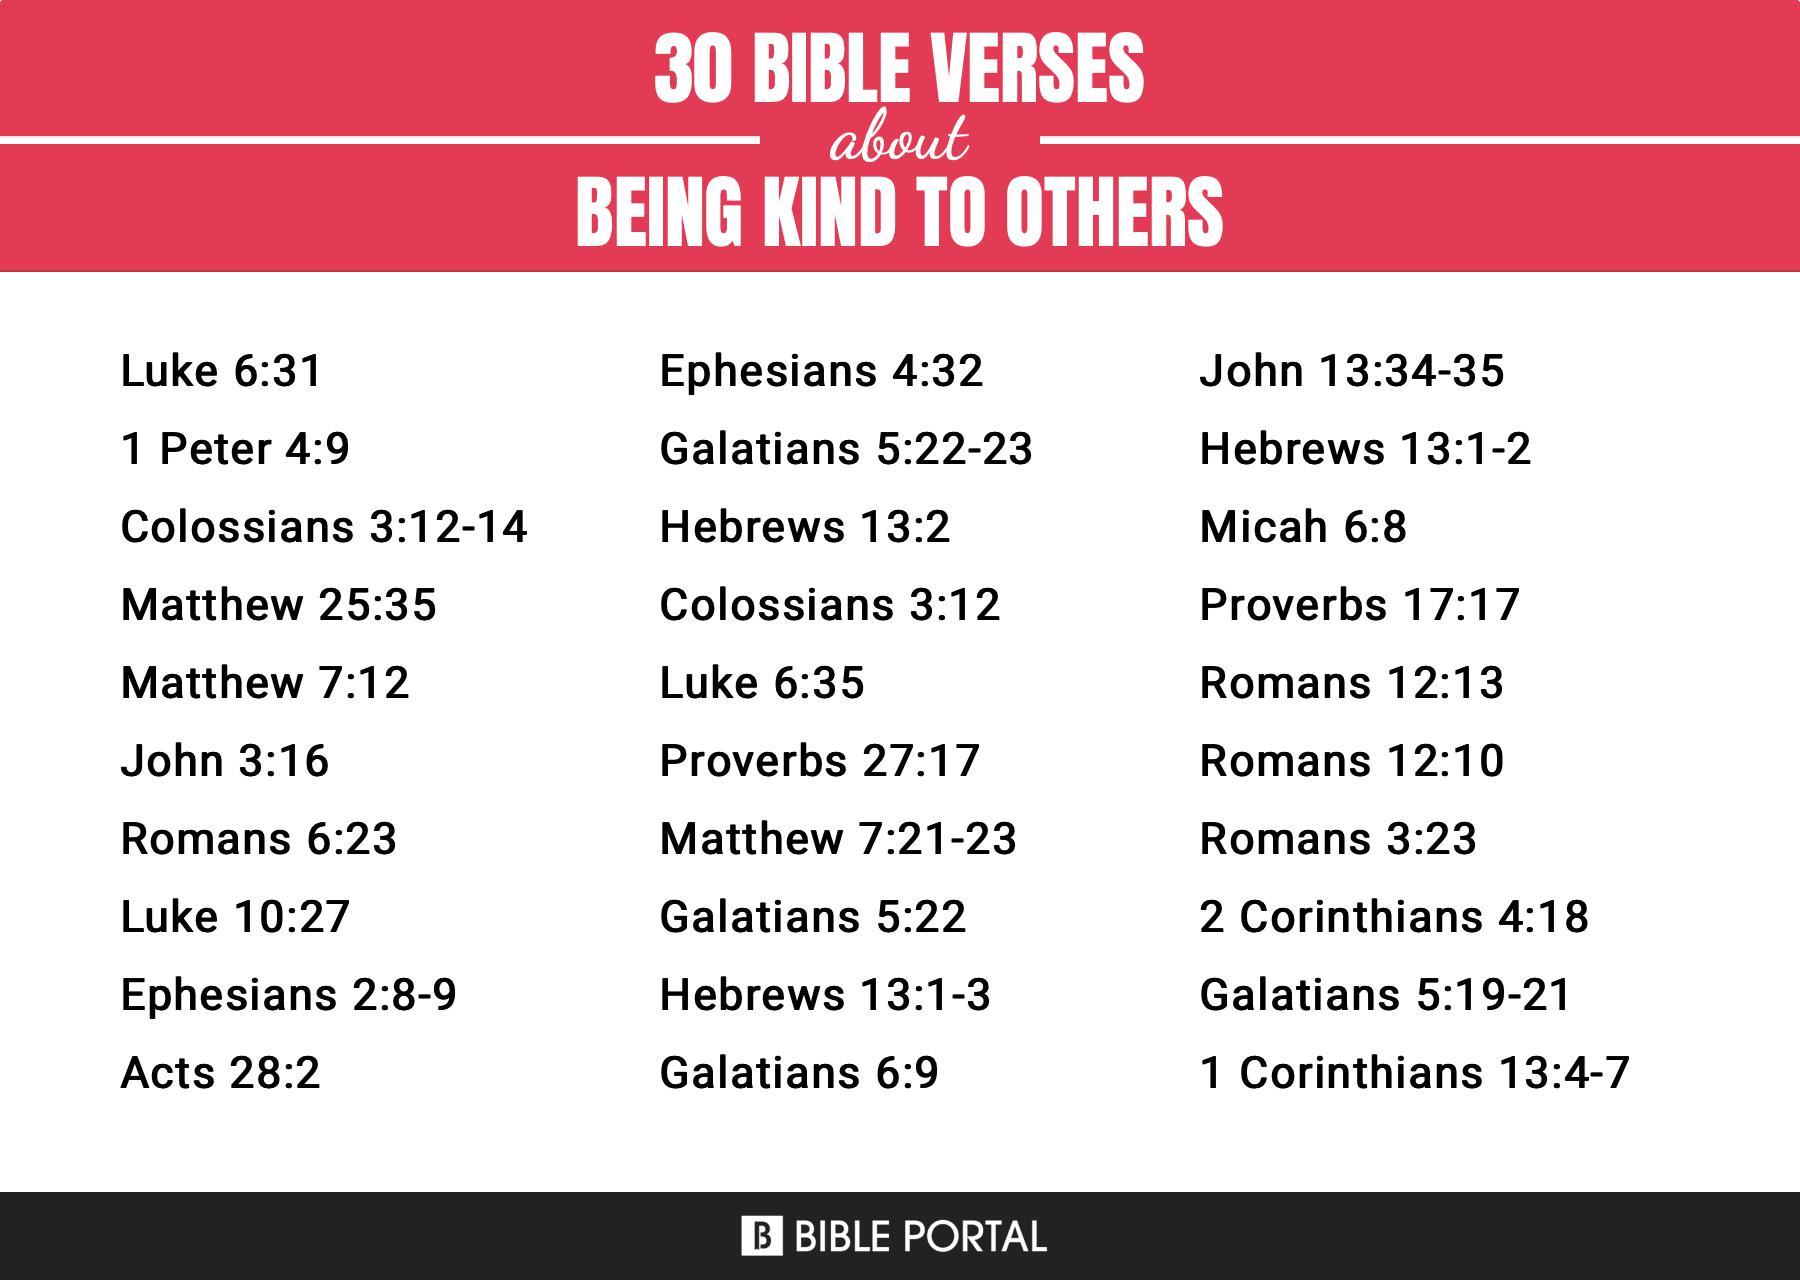 89 Bible Verses about Being Kind To Others